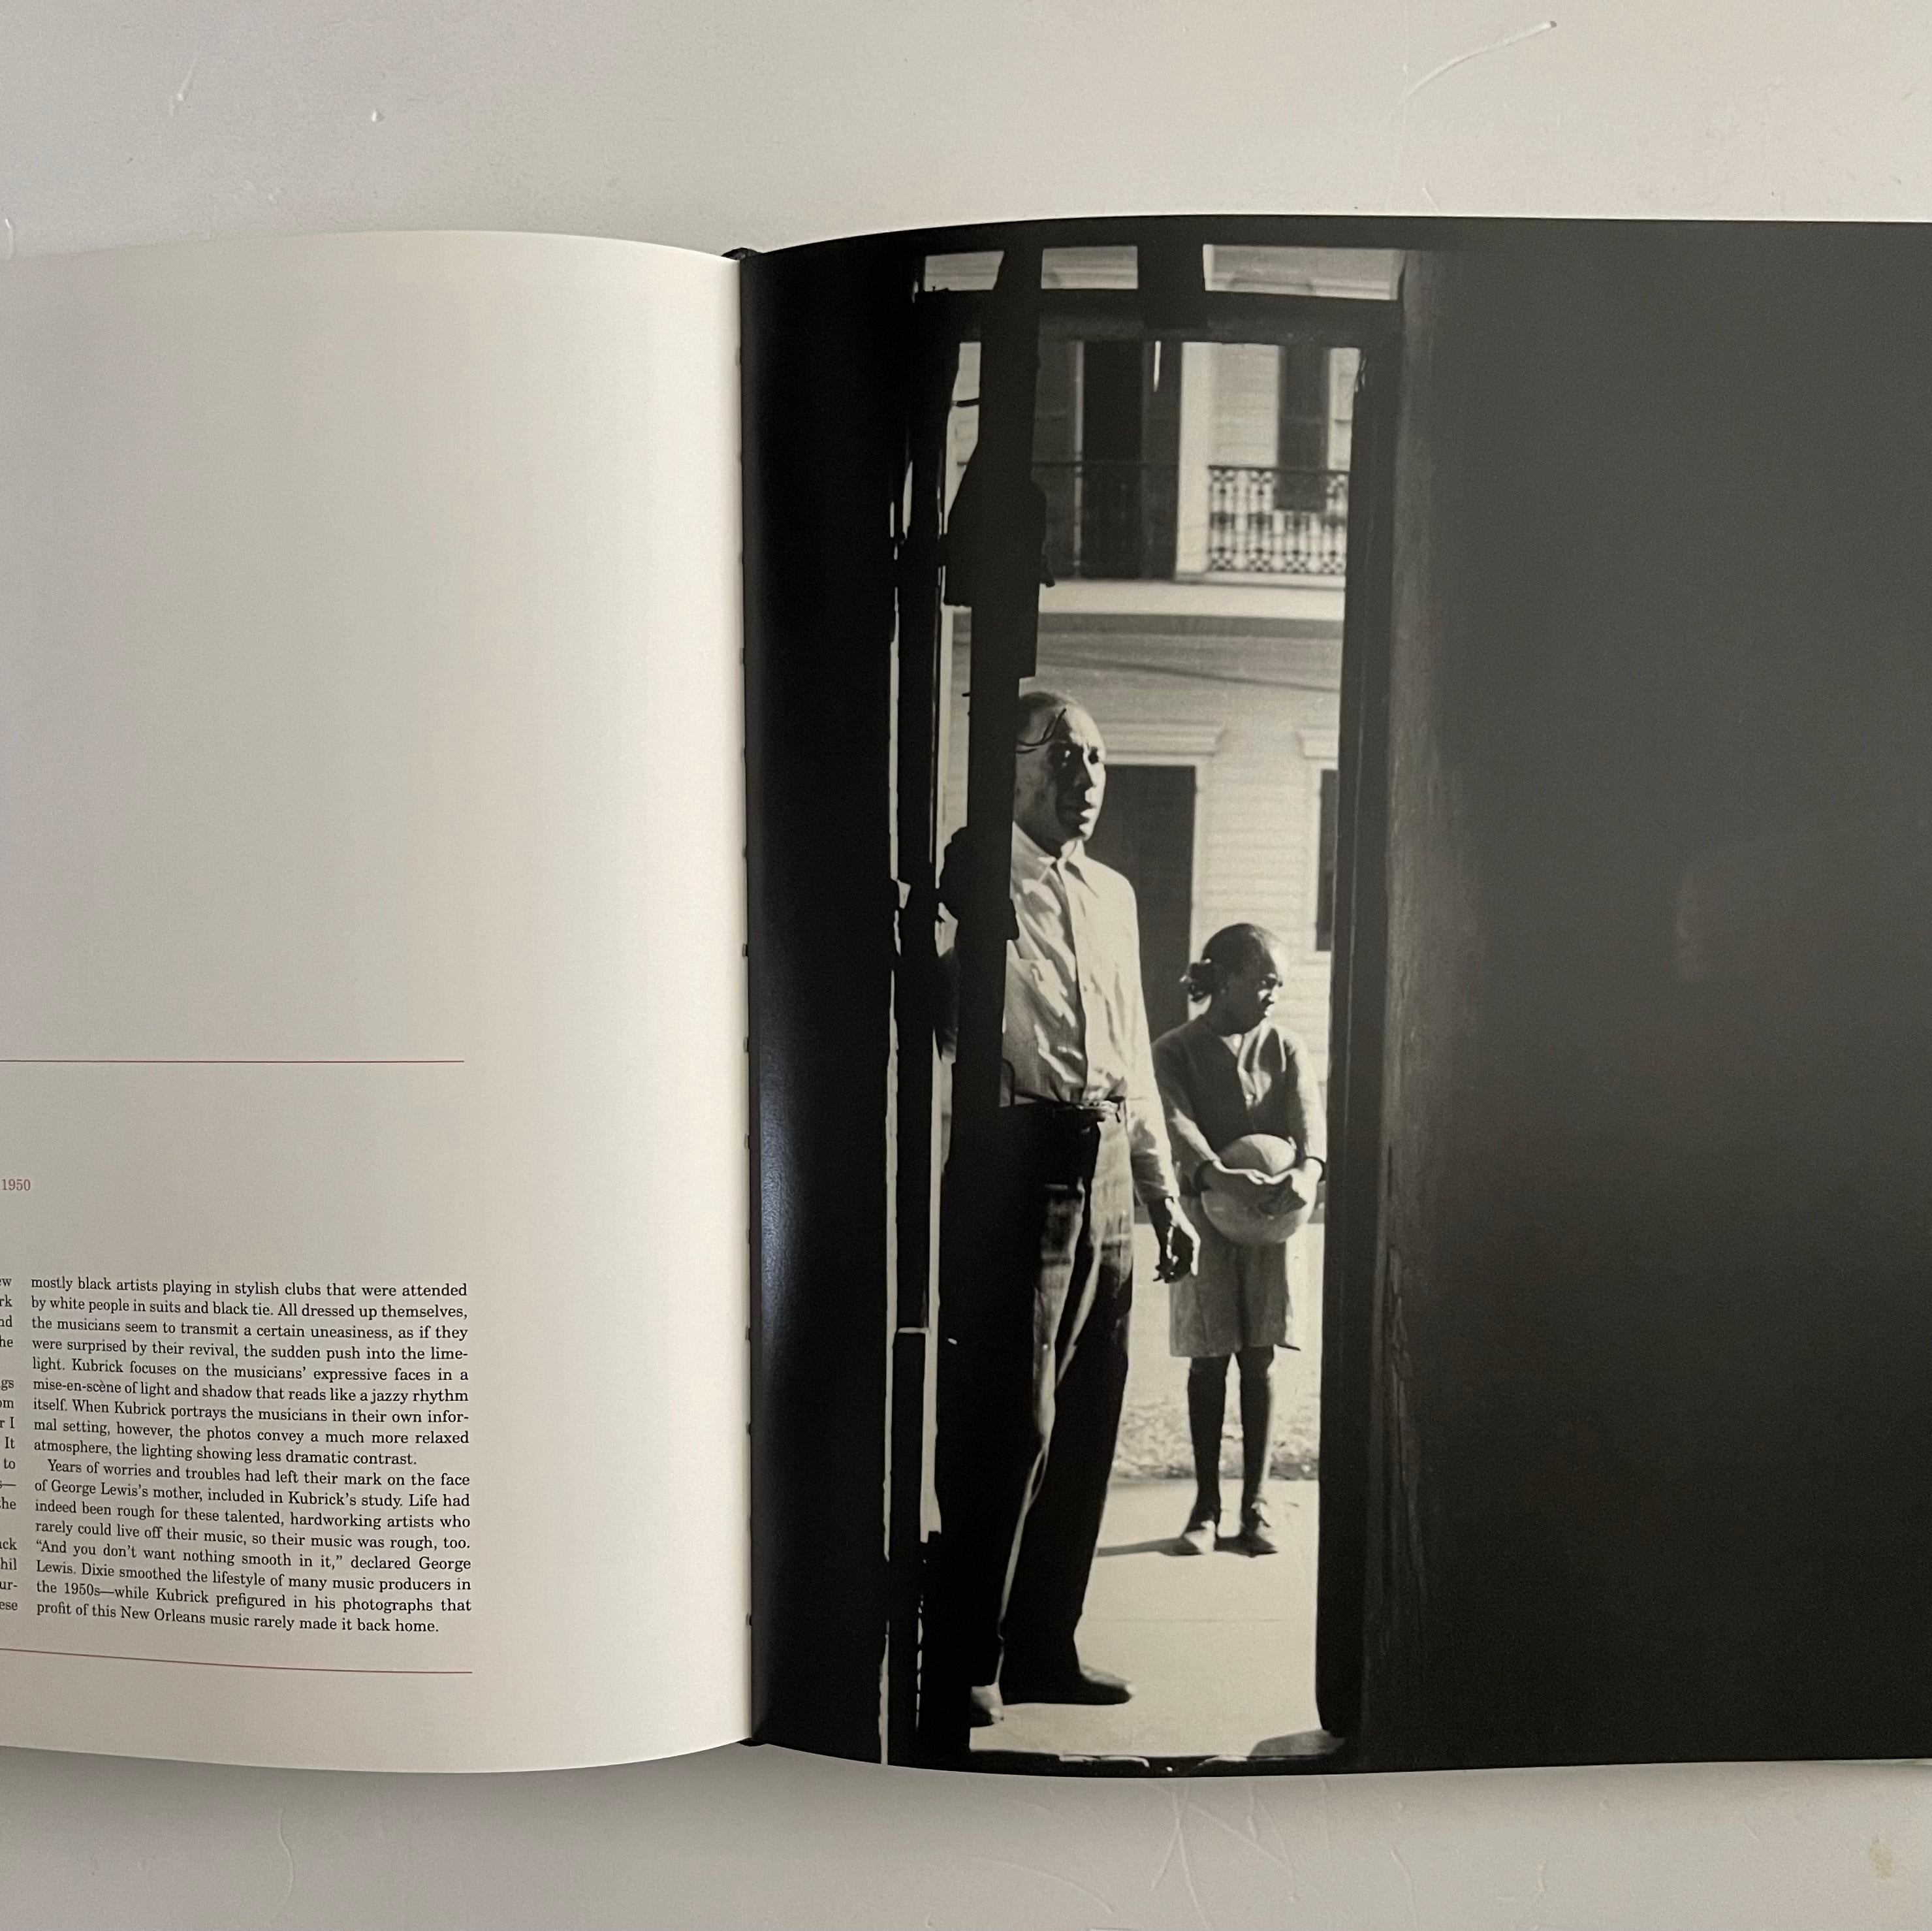 First Edition, published by Phaidon, London & New York, 2005. Text in English. Text by Rainer Crone and introduction by Jeff Wall.

The first book to present the previously unpublished photographs of renowned filmmaker Stanley Kubrick, taken